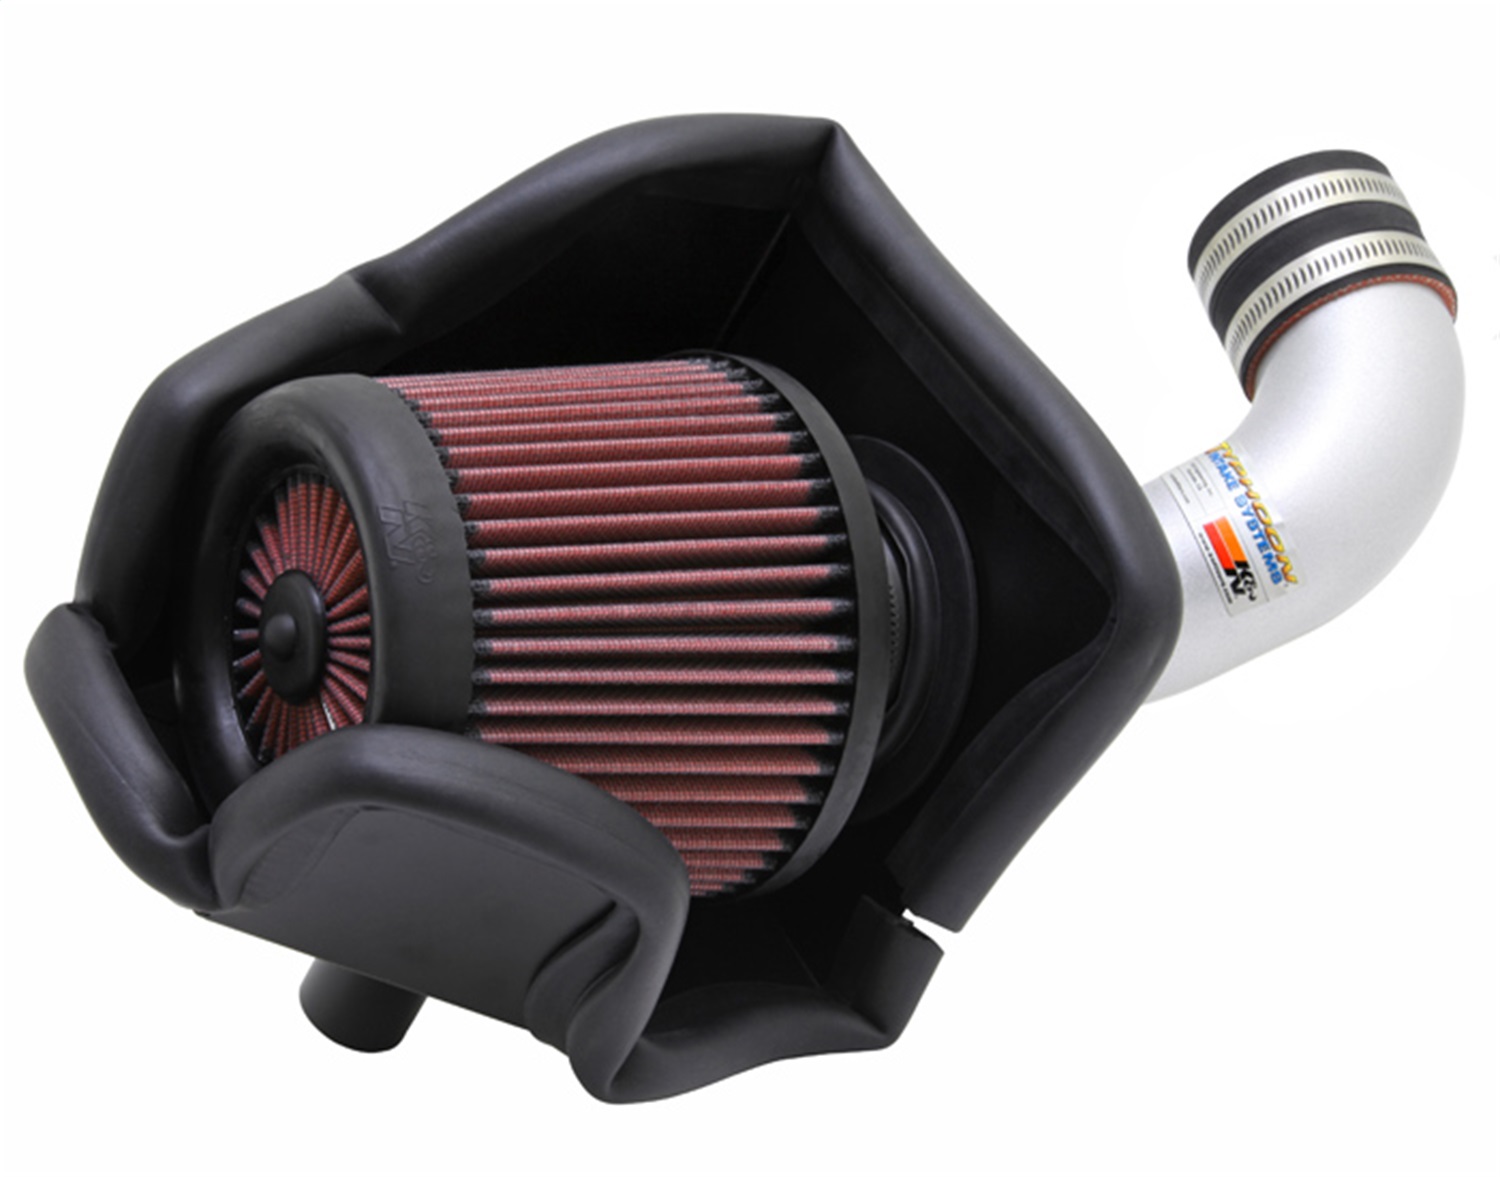 K&N Filters K&N Filters 69-1018TS Typhoon; Cold Air Intake Filter Assembly Fits 11-12 CR-Z